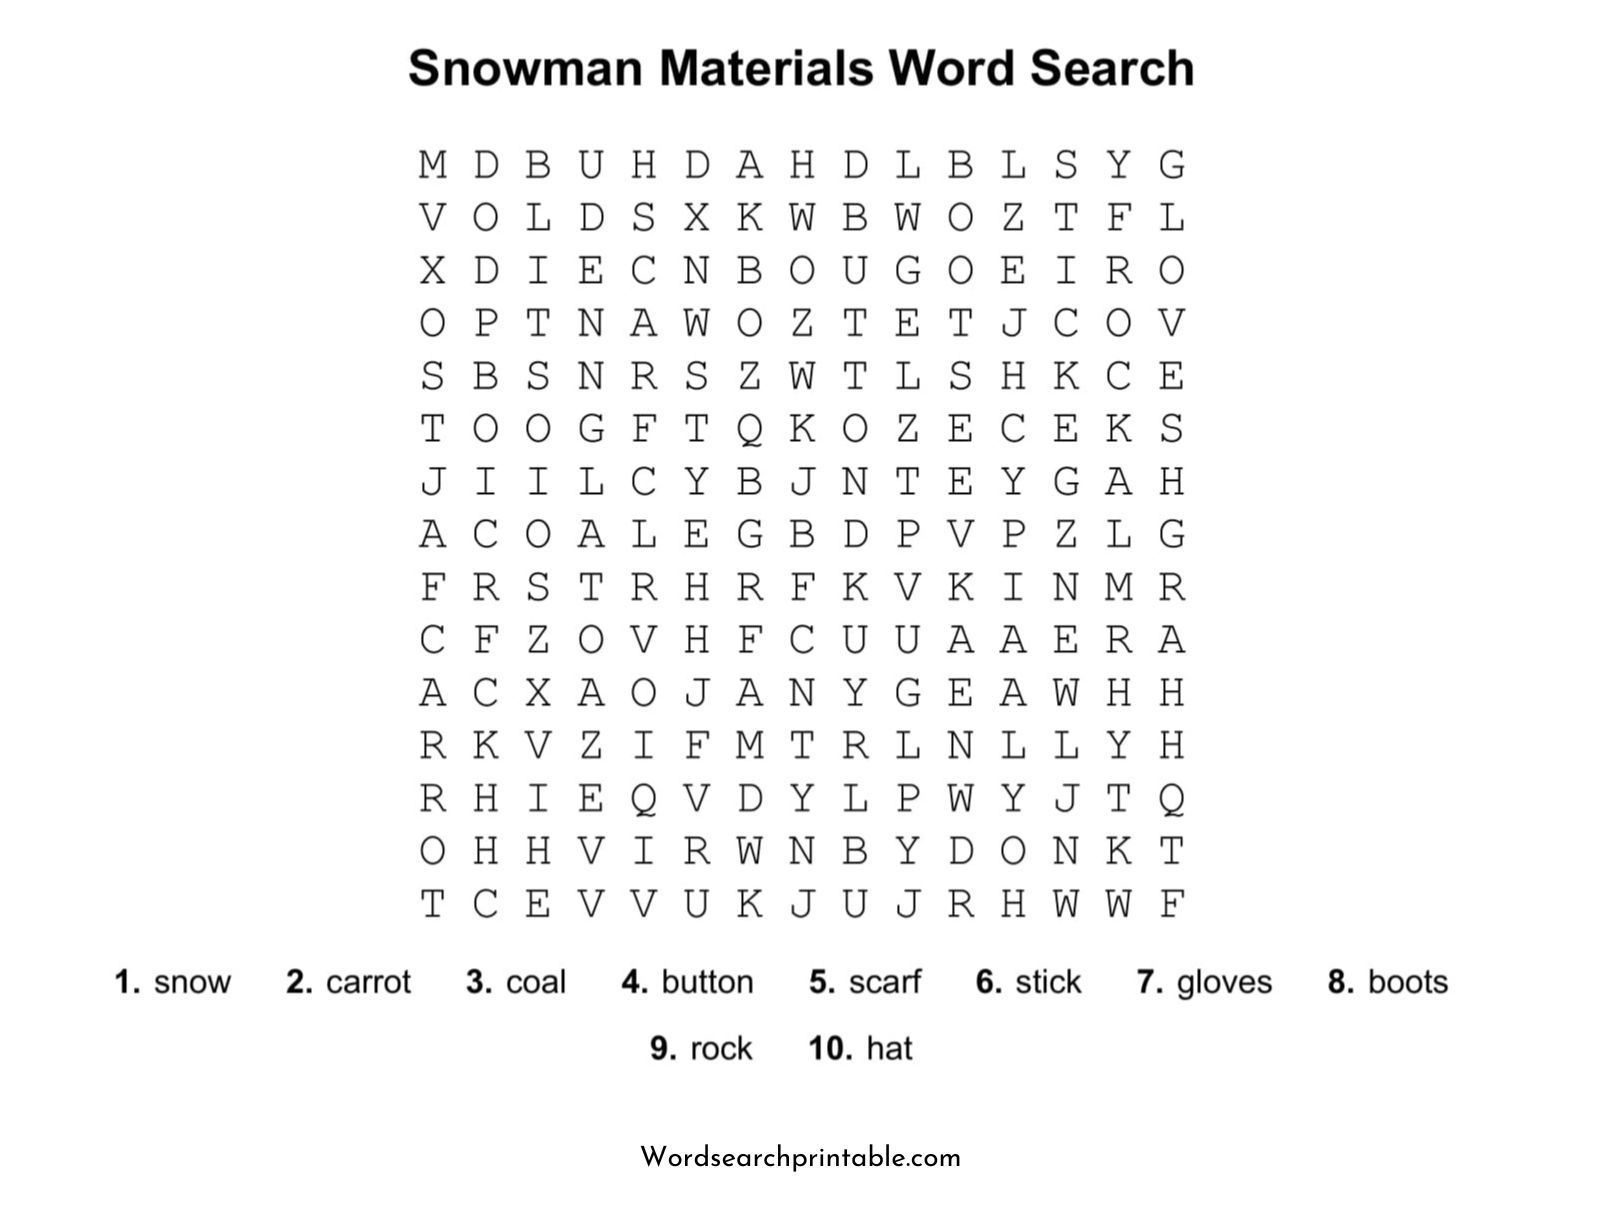 snowman materials word search puzzle